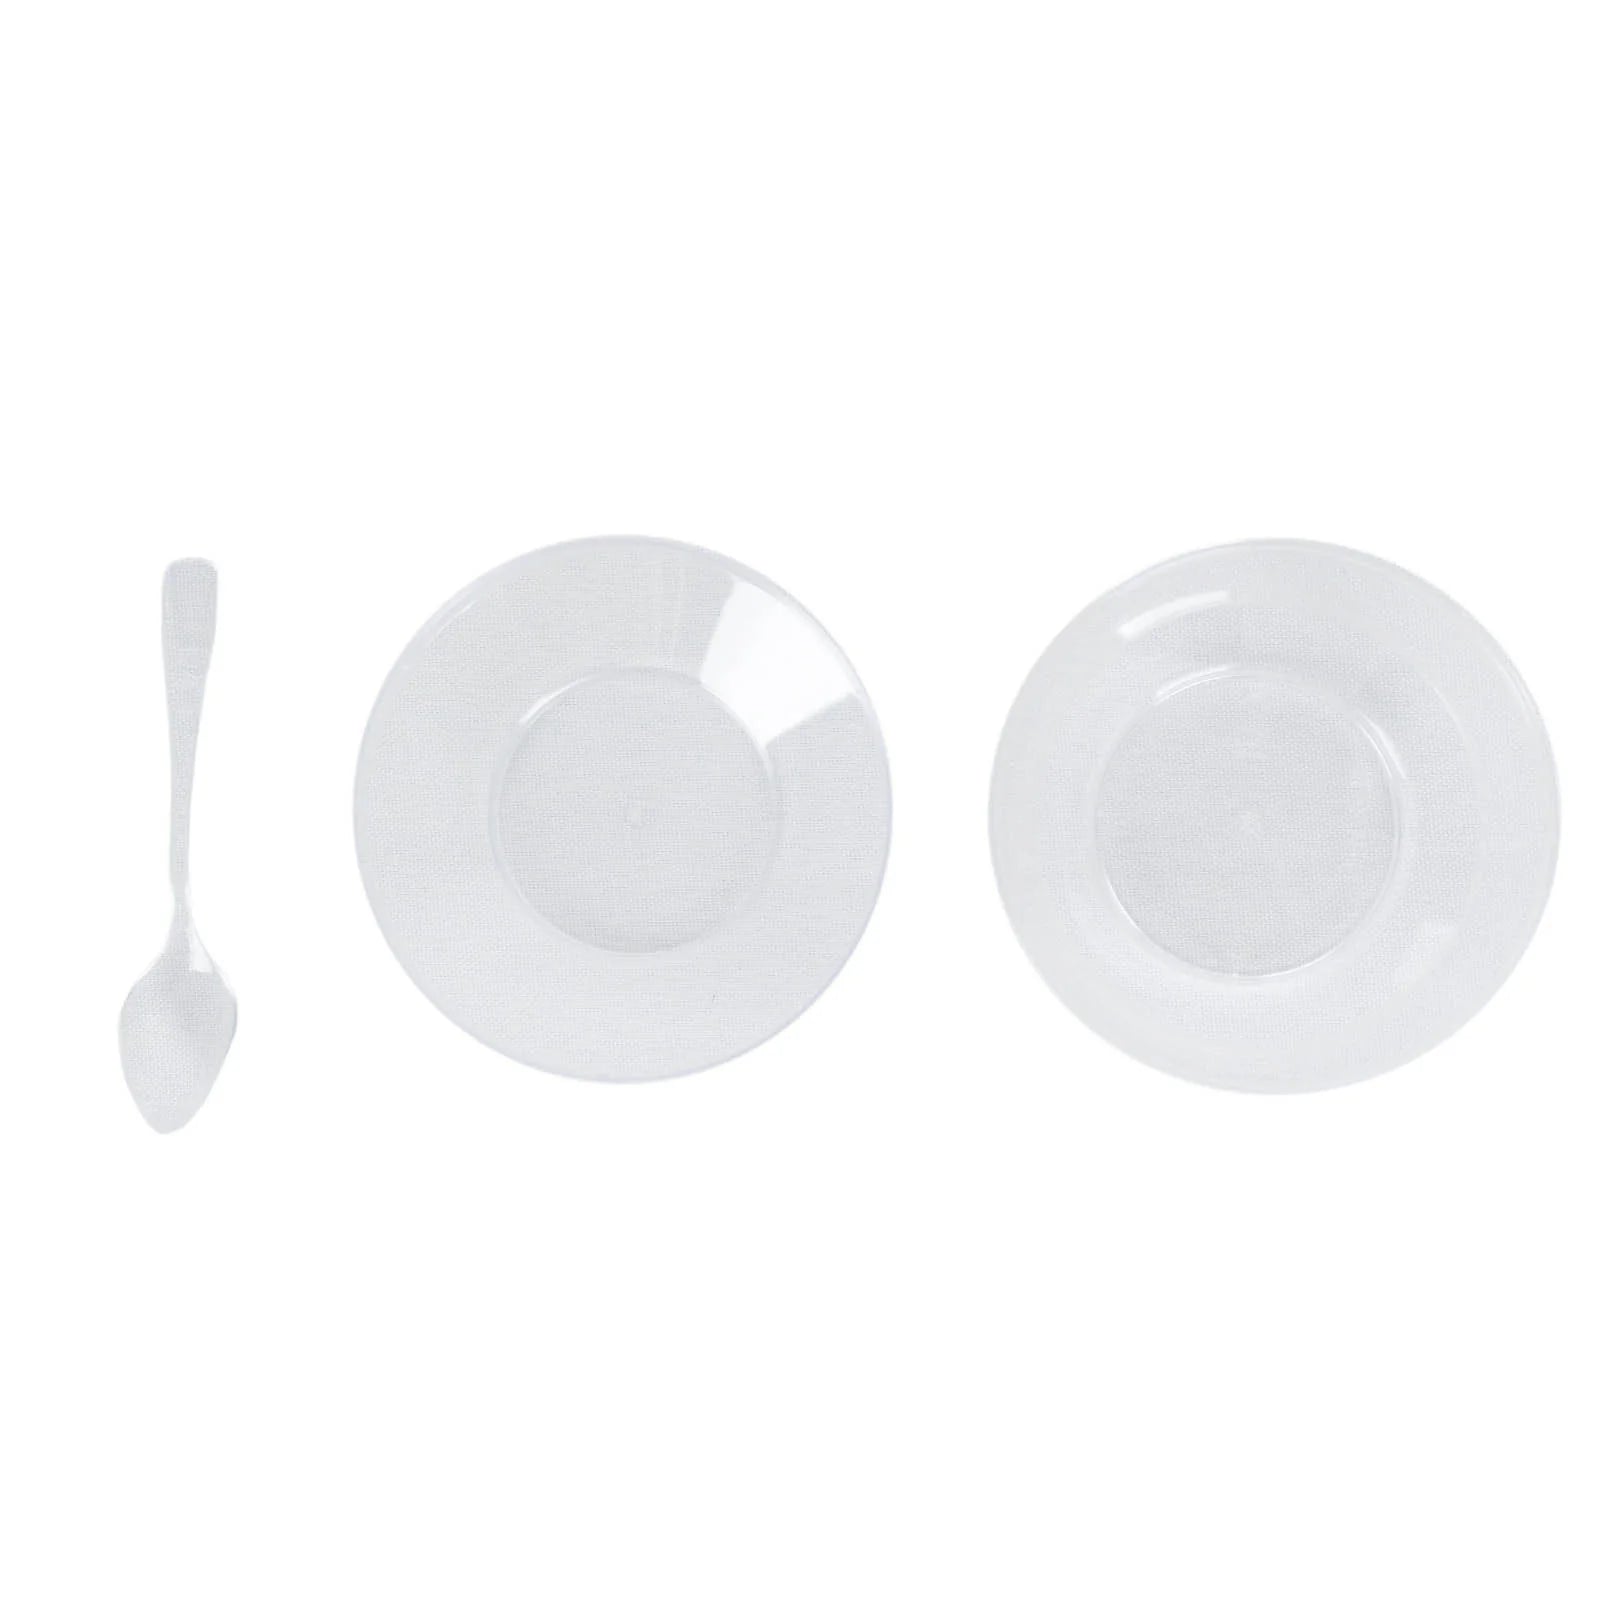 24 Clear 3.5 oz Disposable Round Plastic Dessert Cups with Lid and Spoon Set